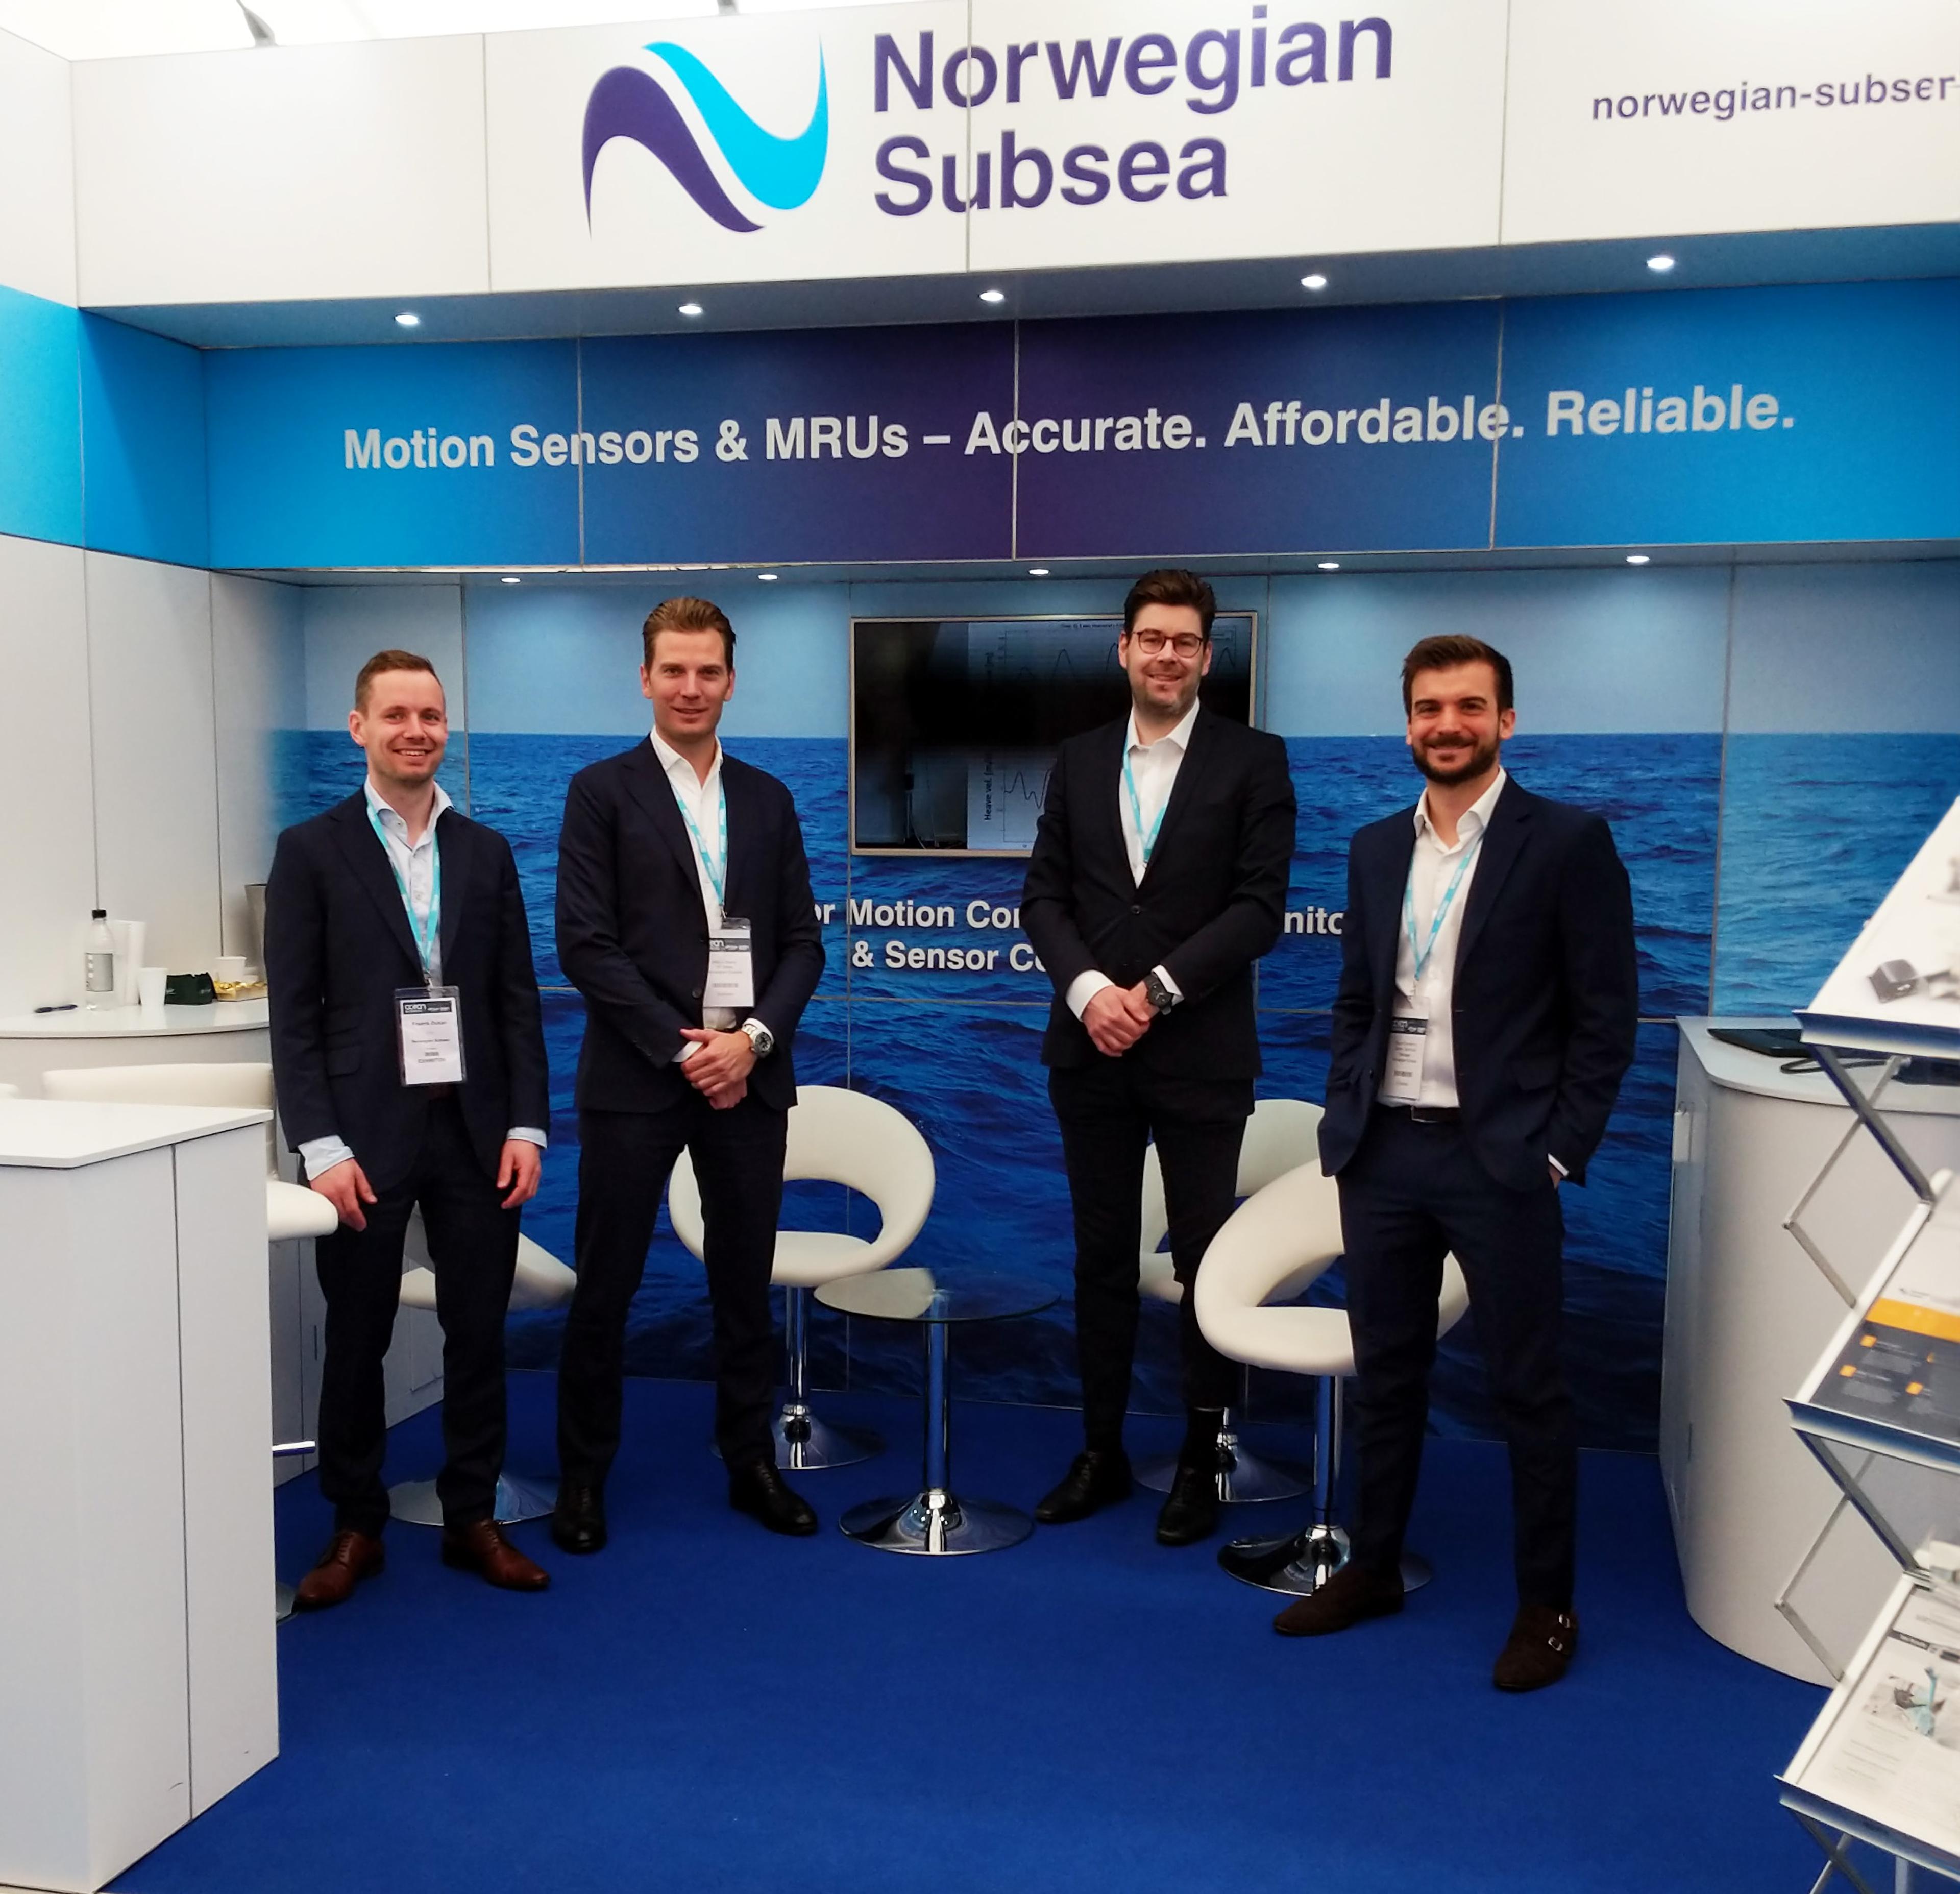 norwegian subsea stand at a fair